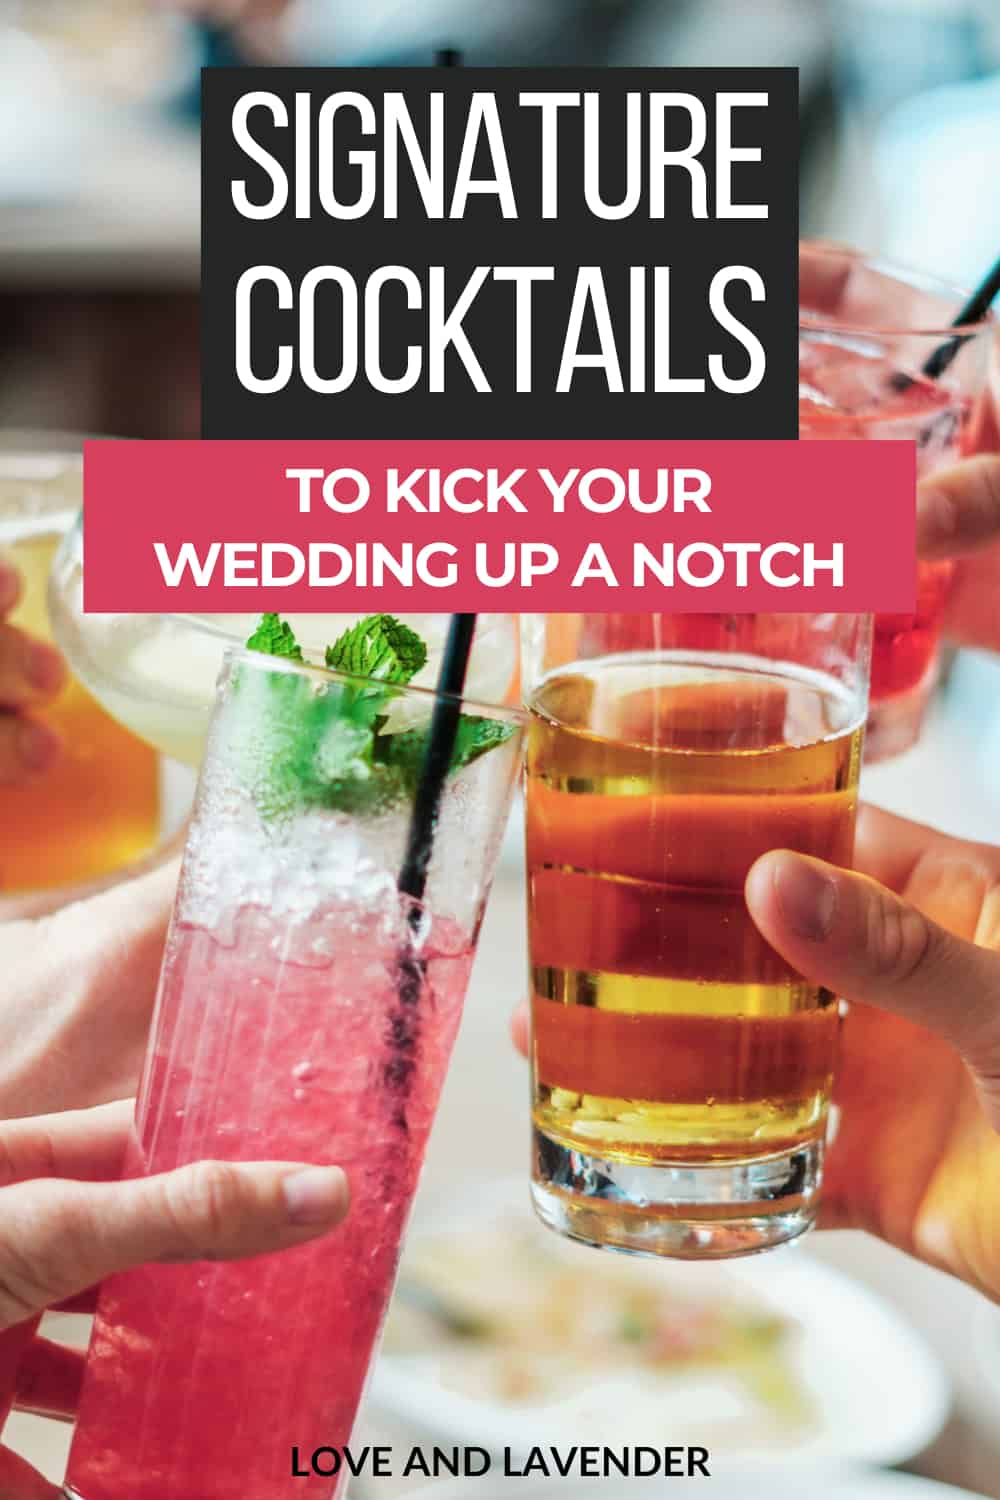 Pinterest pin - Signature Cocktails to Kick Your Wedding Up A Notch